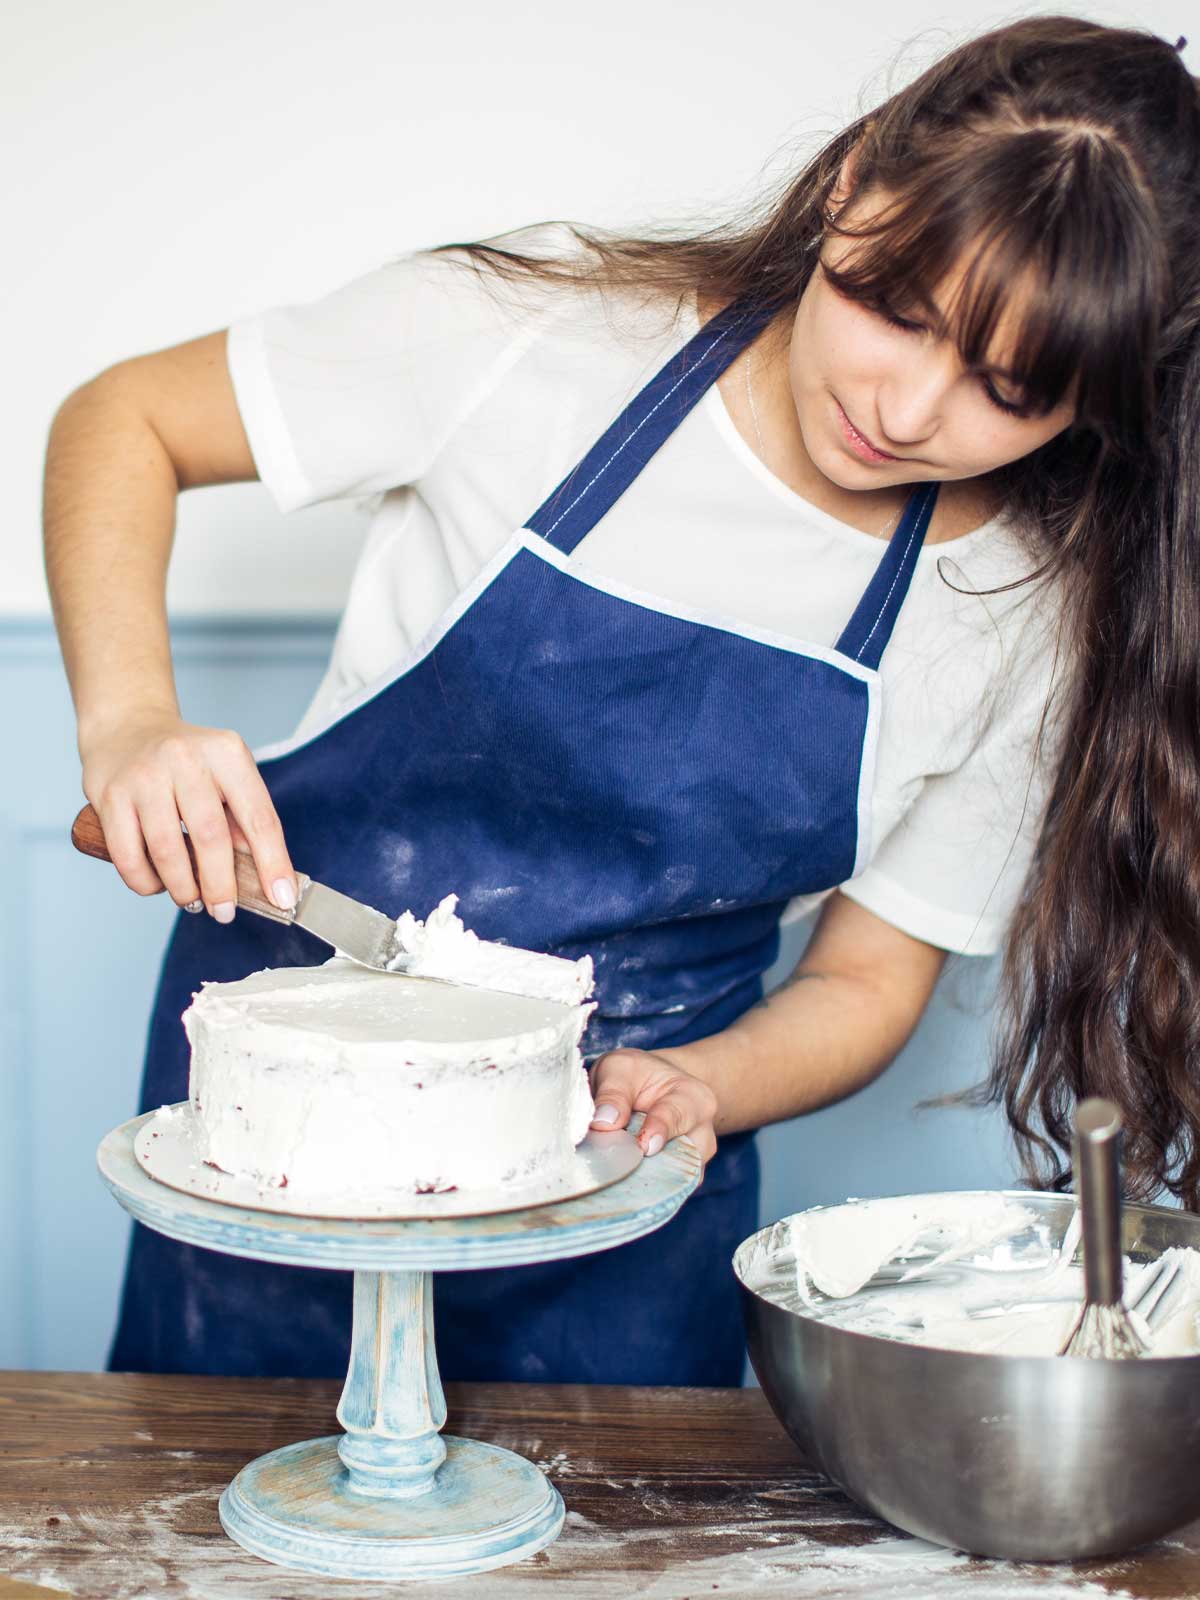 A person applying a thick layer of frosting on a cake